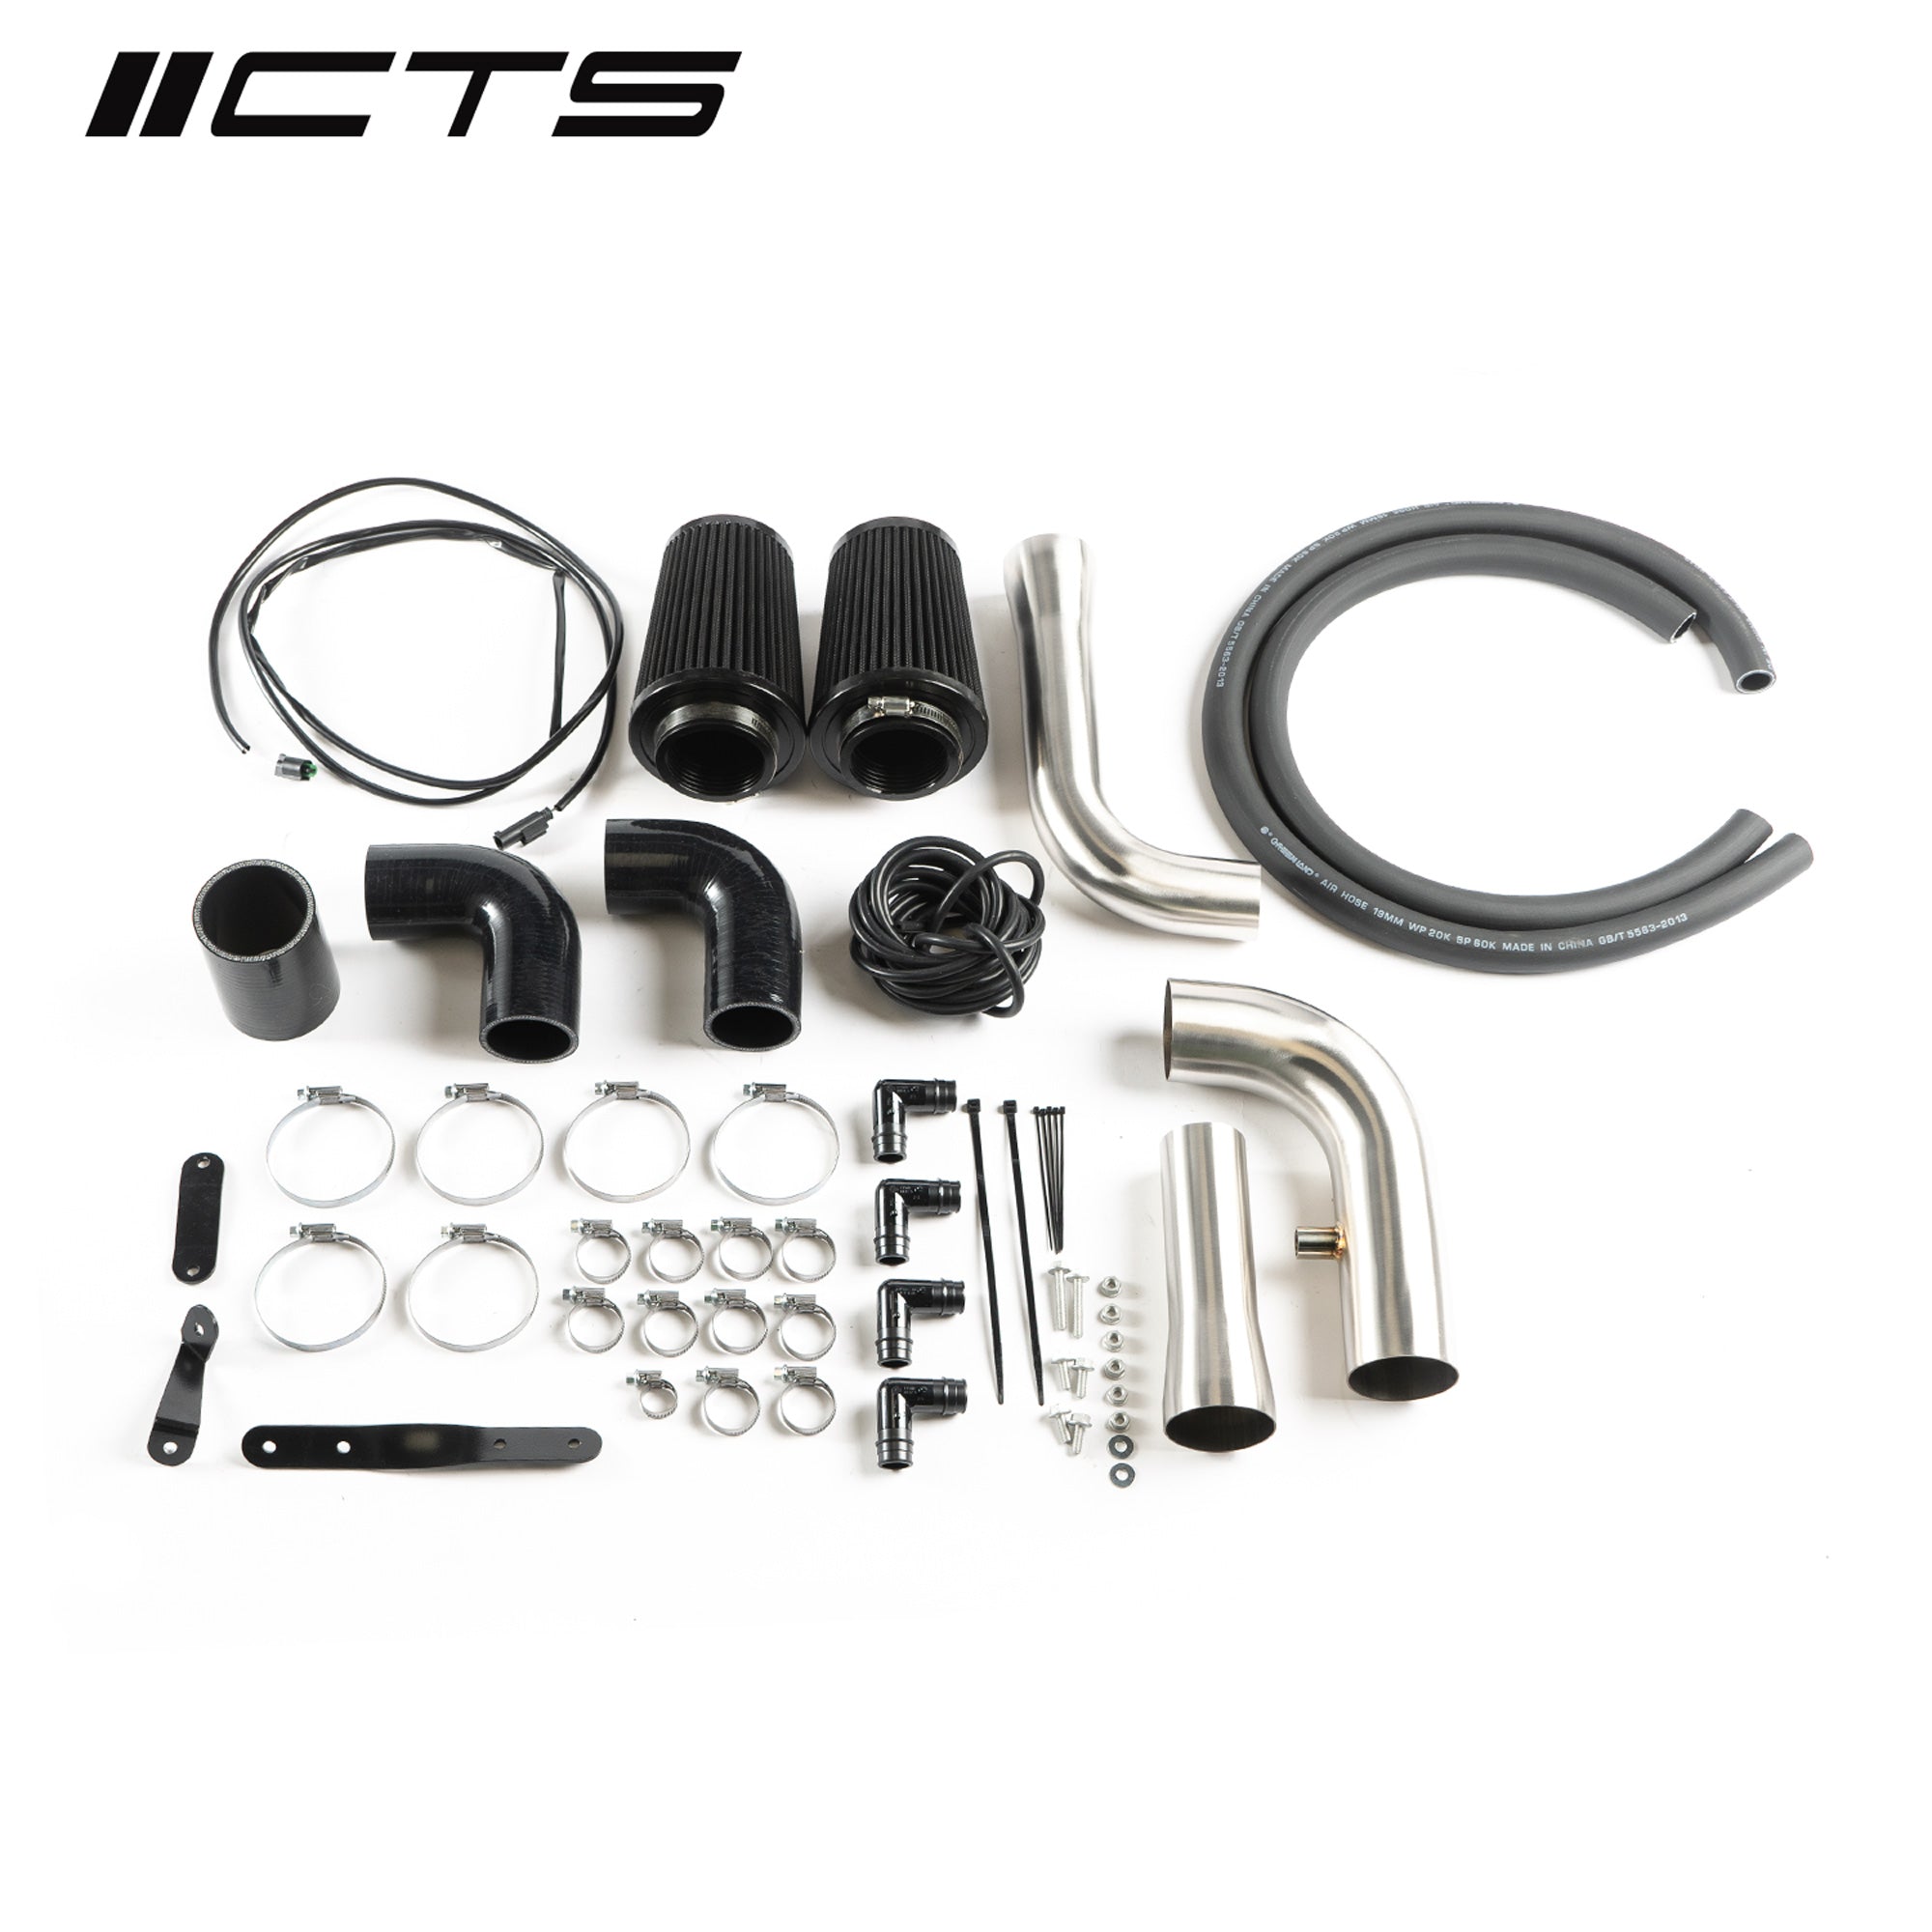 CTS TURBO N54 INTAKE RELOCATION KIT FOR BMW E9X/E8X 335I/135I WITH 2″ TURBO INLETS – TR-0300 AND TR-0300RS